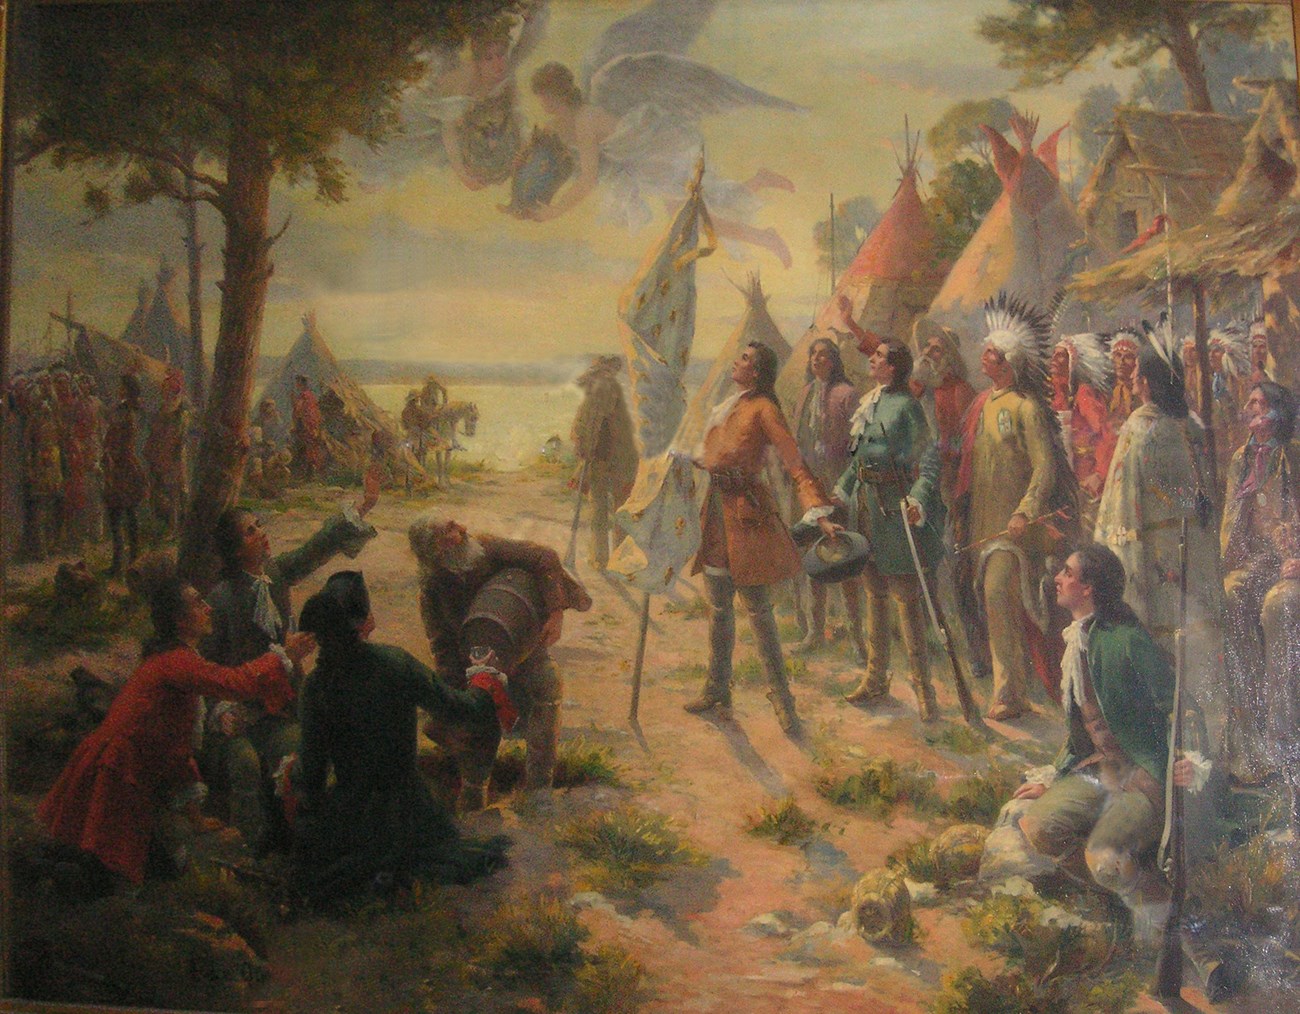 Painting of French Settlers arriving in St. Louis in 1764. A few of the men look to the sky and celebrate the establishment of "civilization" in St. Louis.